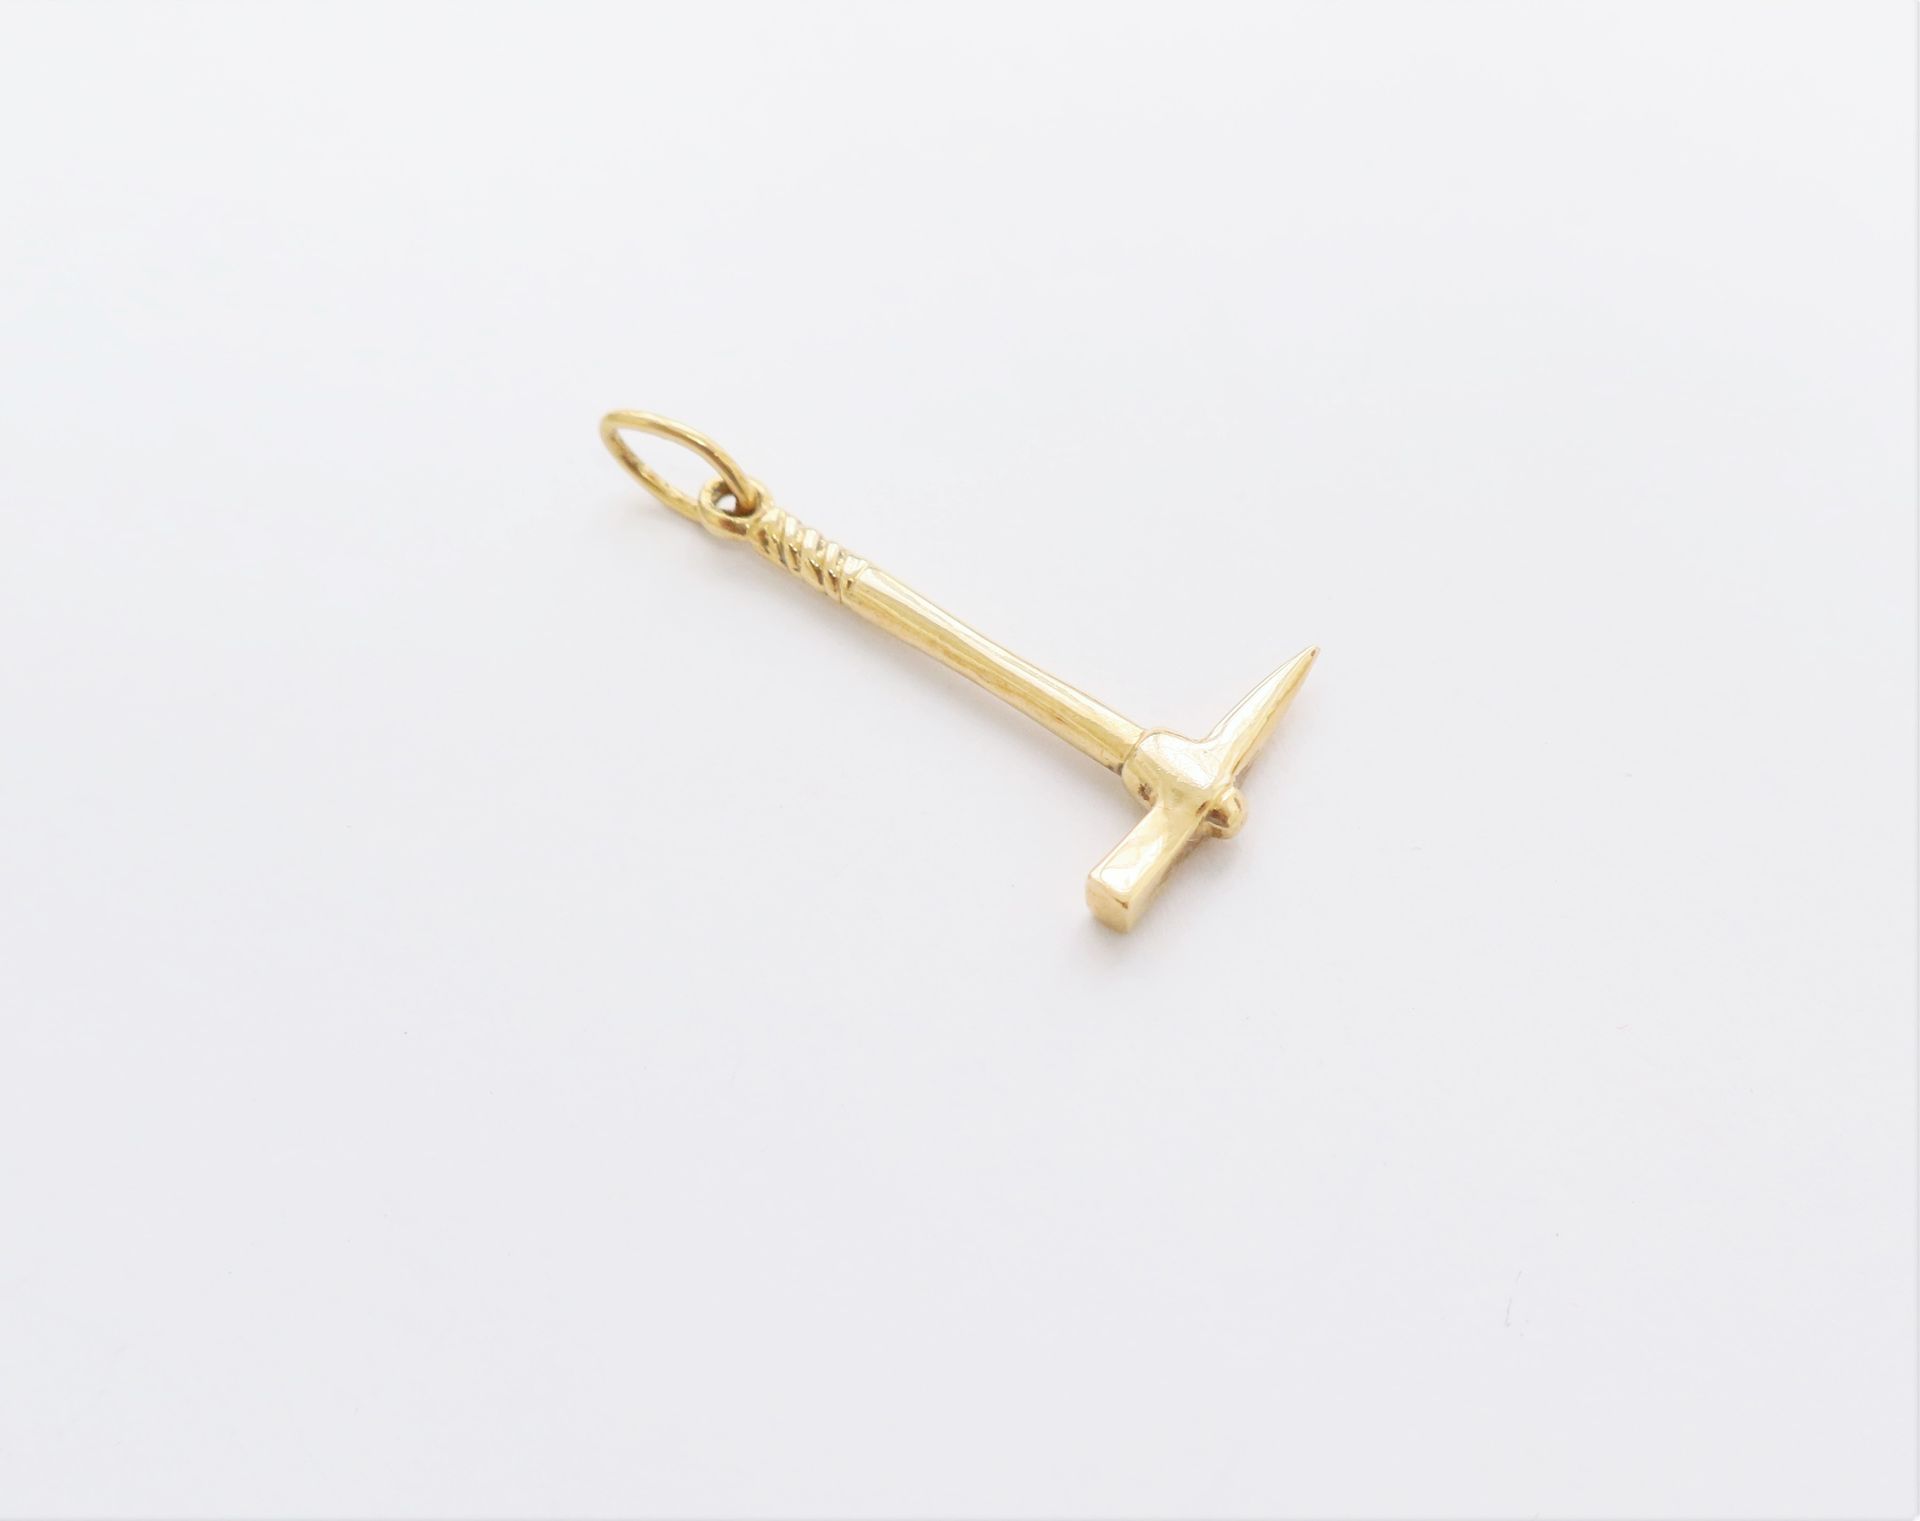 Null Companion pendant in 18K gold representing a pick. Weight : 3 g